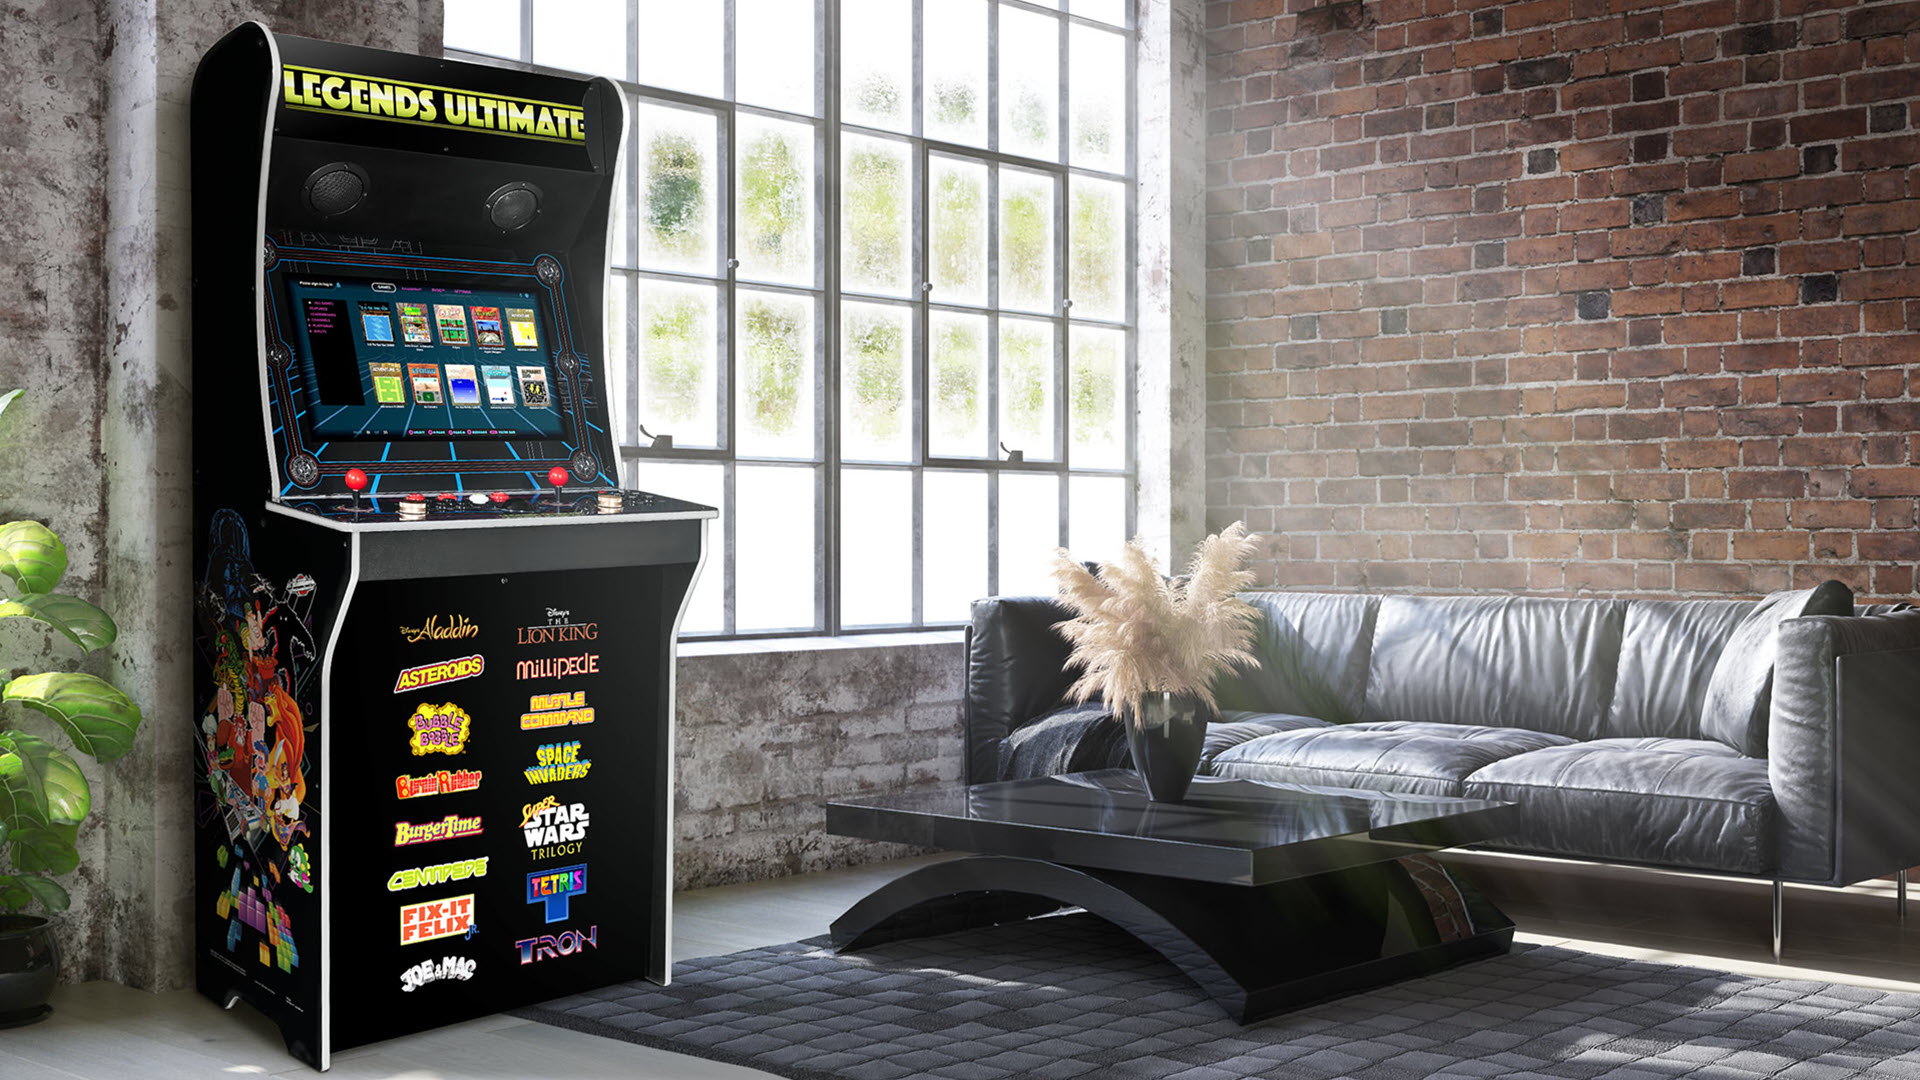 The Legends Final Is an All-in-One 300 Game Arcade Machine for $600